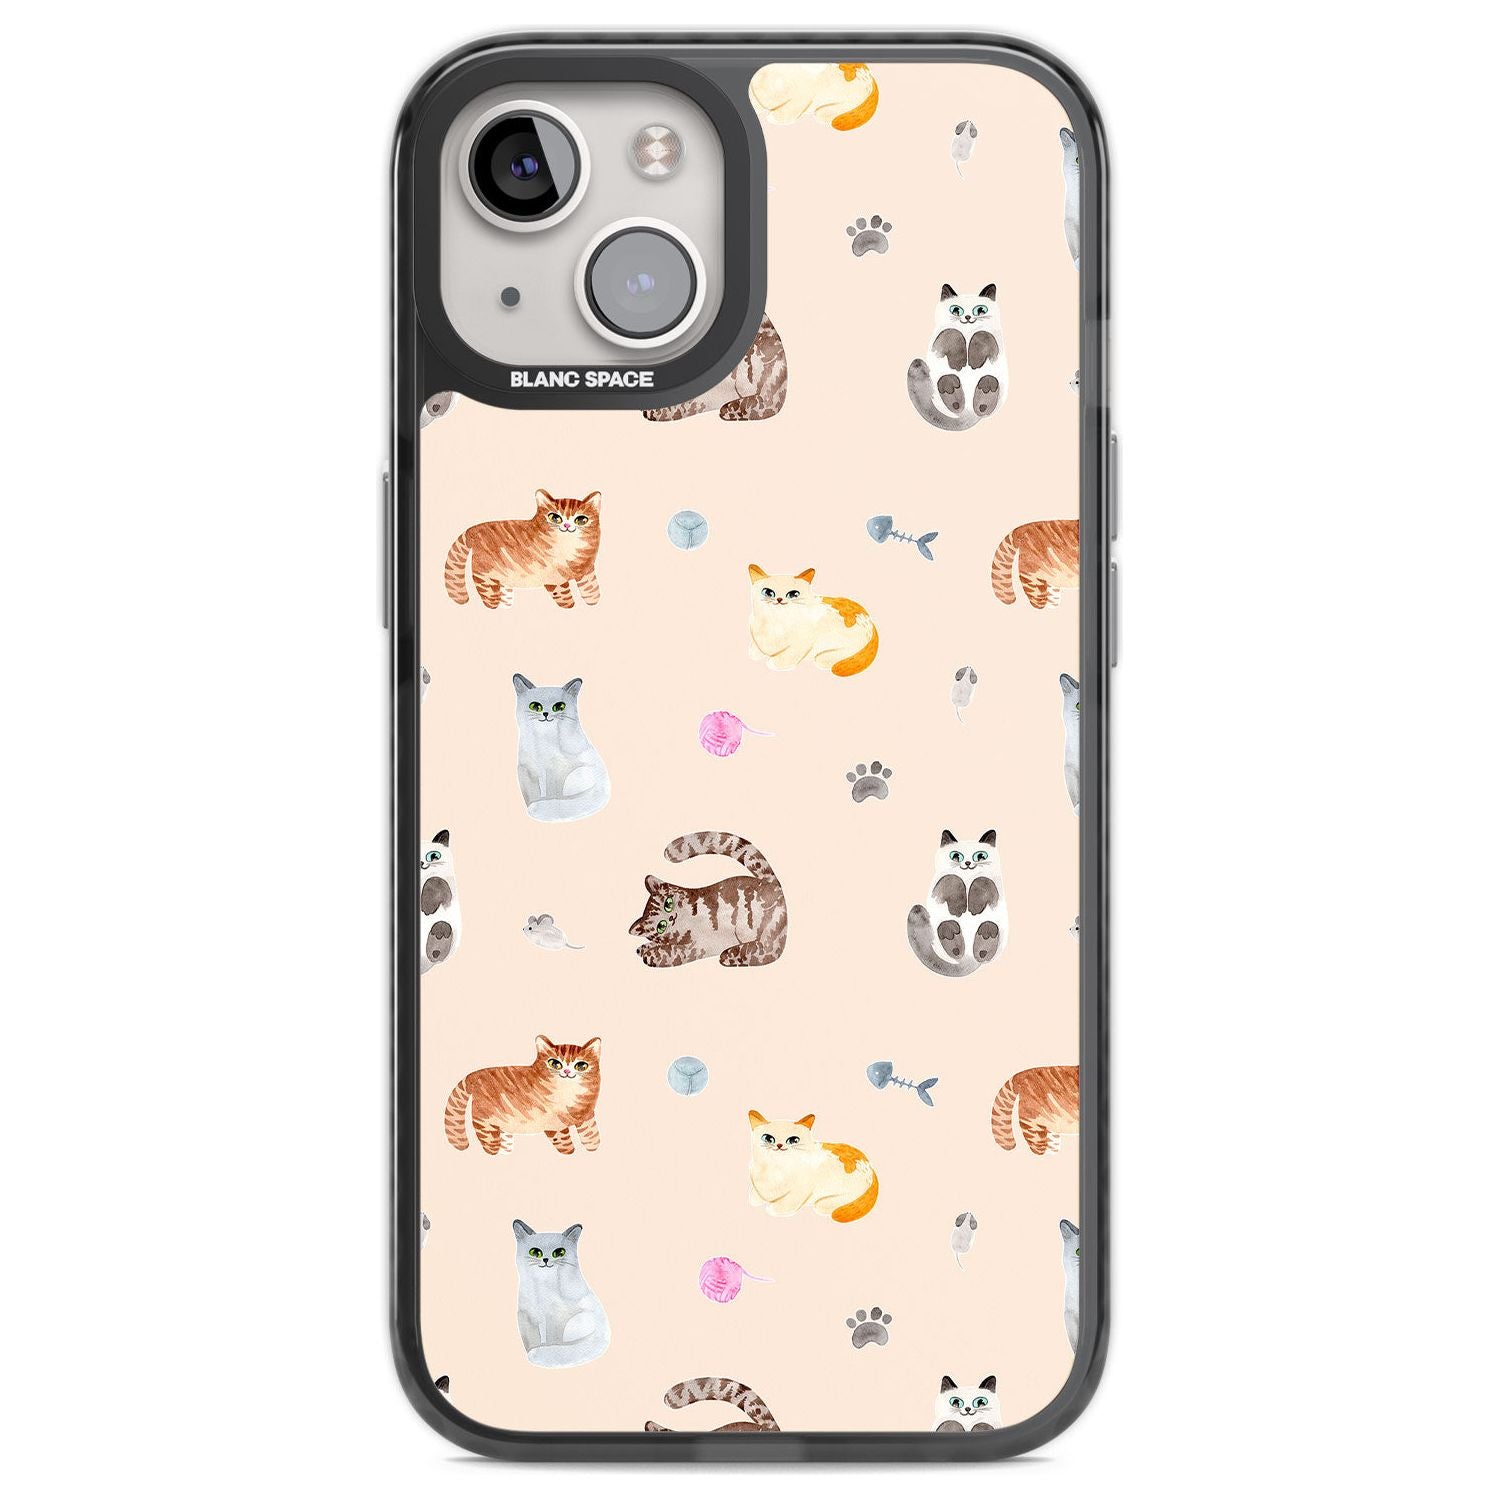 Cats with Toys Phone Case iPhone 12 / Black Impact Case,iPhone 13 / Black Impact Case,iPhone 12 Pro / Black Impact Case,iPhone 14 / Black Impact Case,iPhone 15 Plus / Black Impact Case,iPhone 15 / Black Impact Case Blanc Space